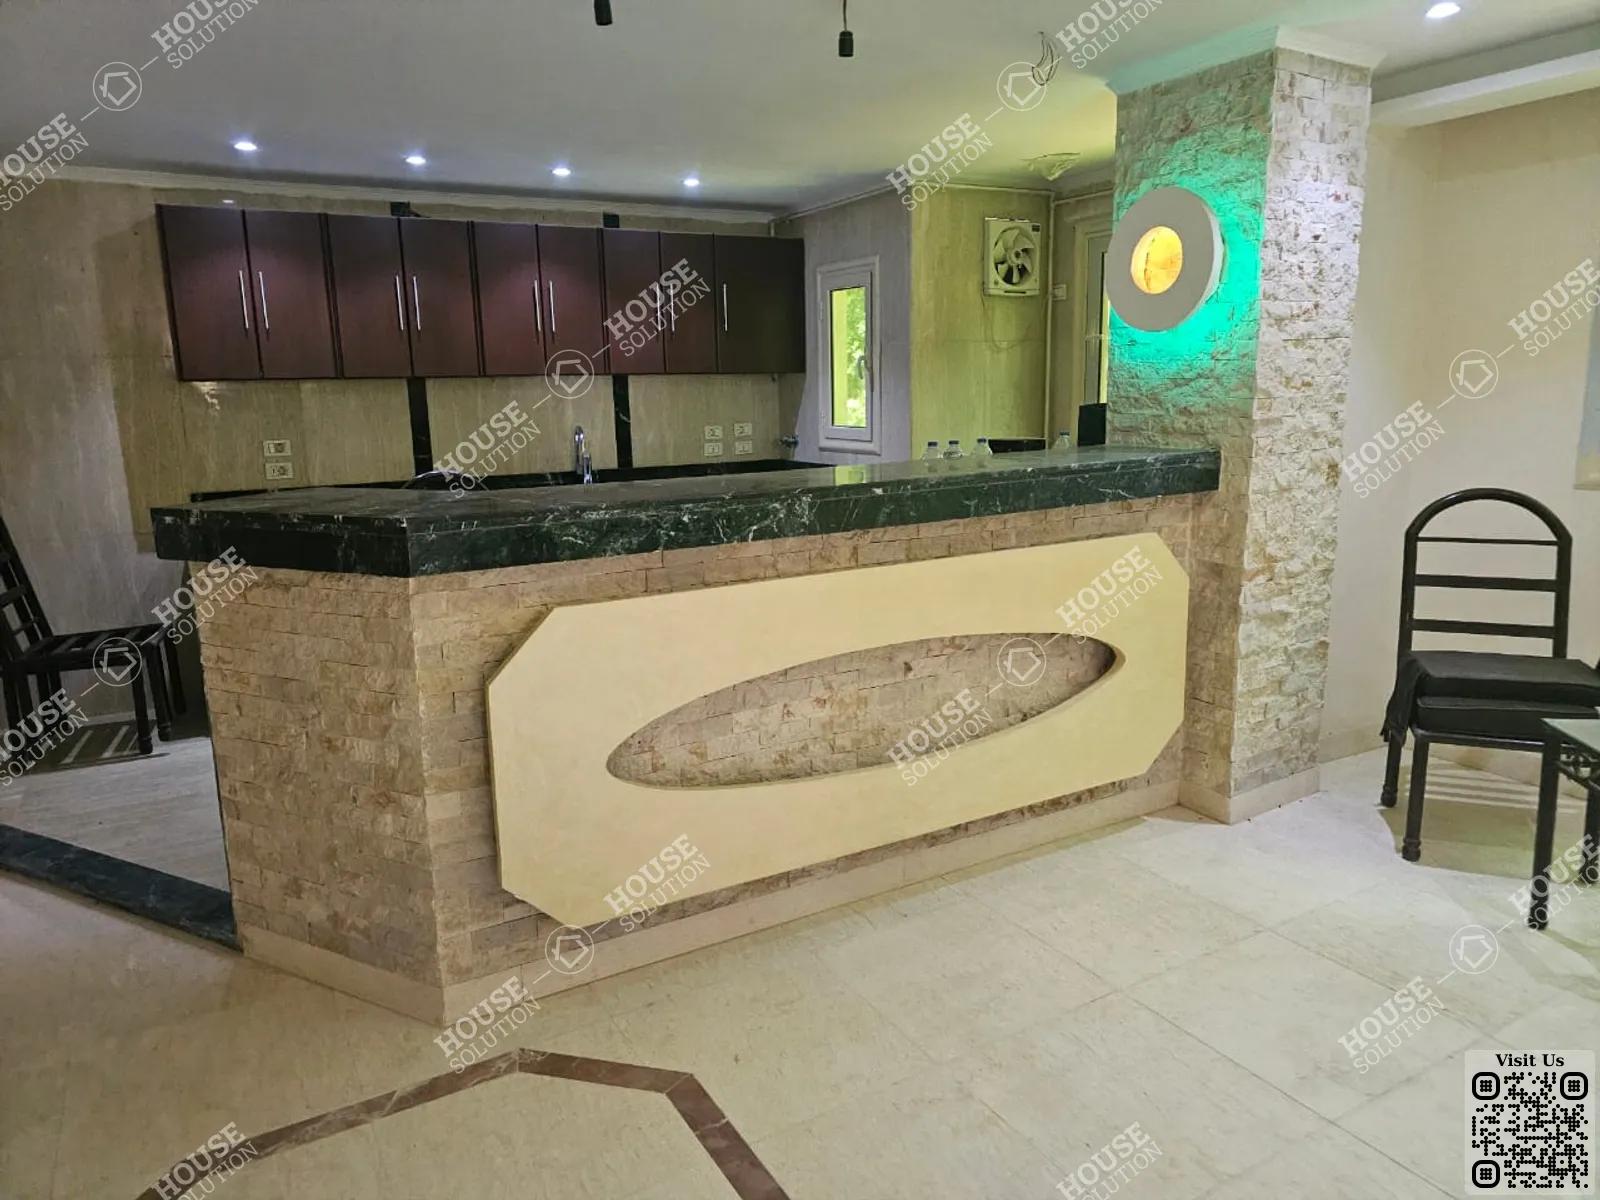 KITCHEN  @ Apartments For Rent In Maadi Maadi Degla Area: 200 m² consists of 3 Bedrooms 4 Bathrooms Furnished 5 stars #5916-2